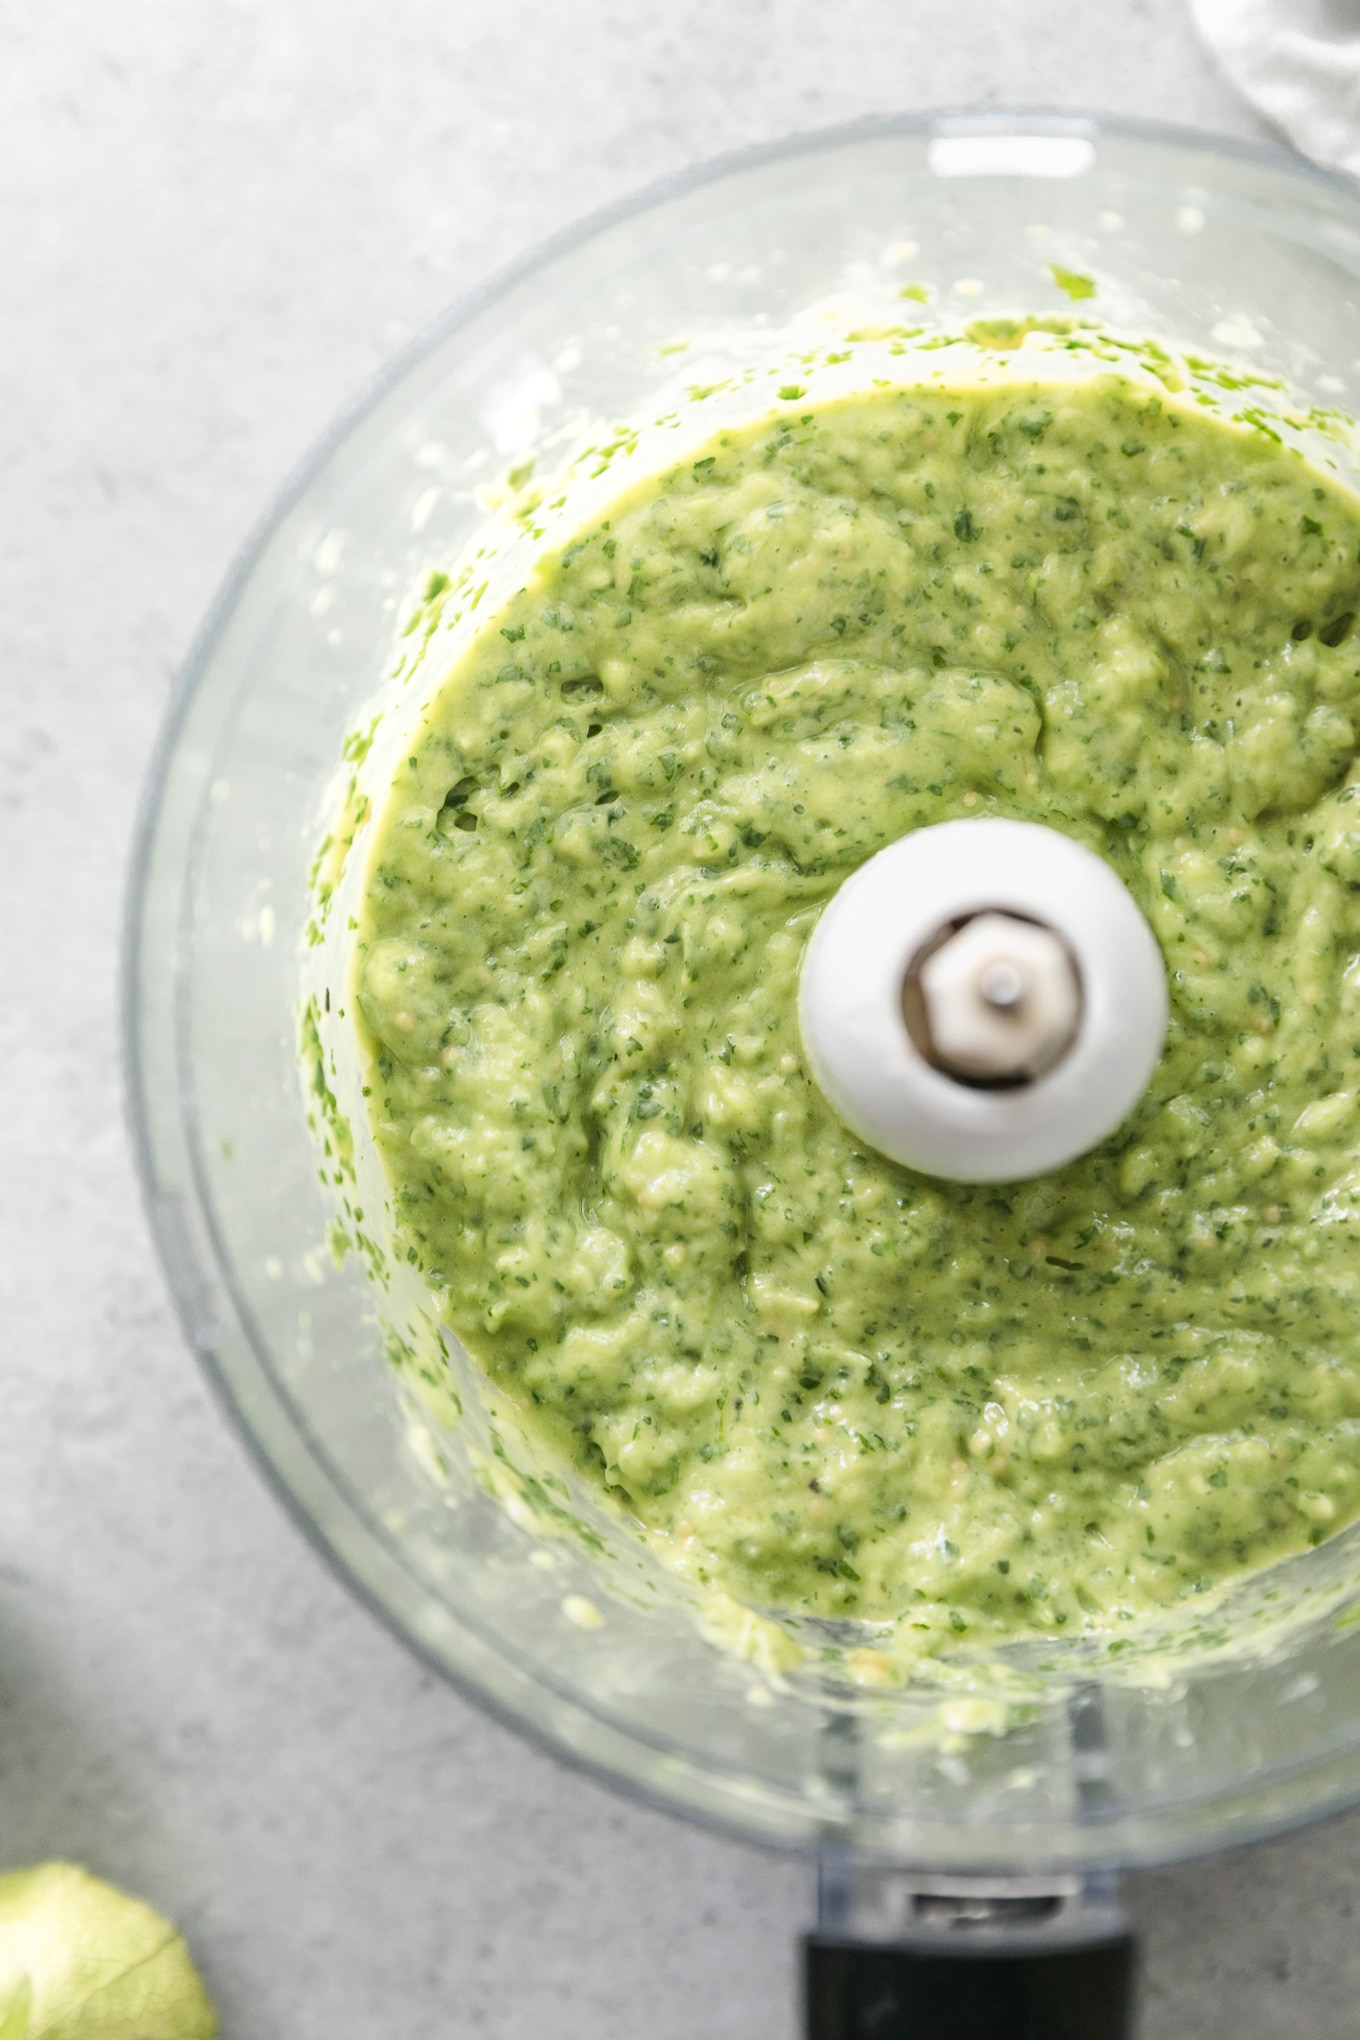 Overhead shot of a food processor filled with green avocado salsa verde